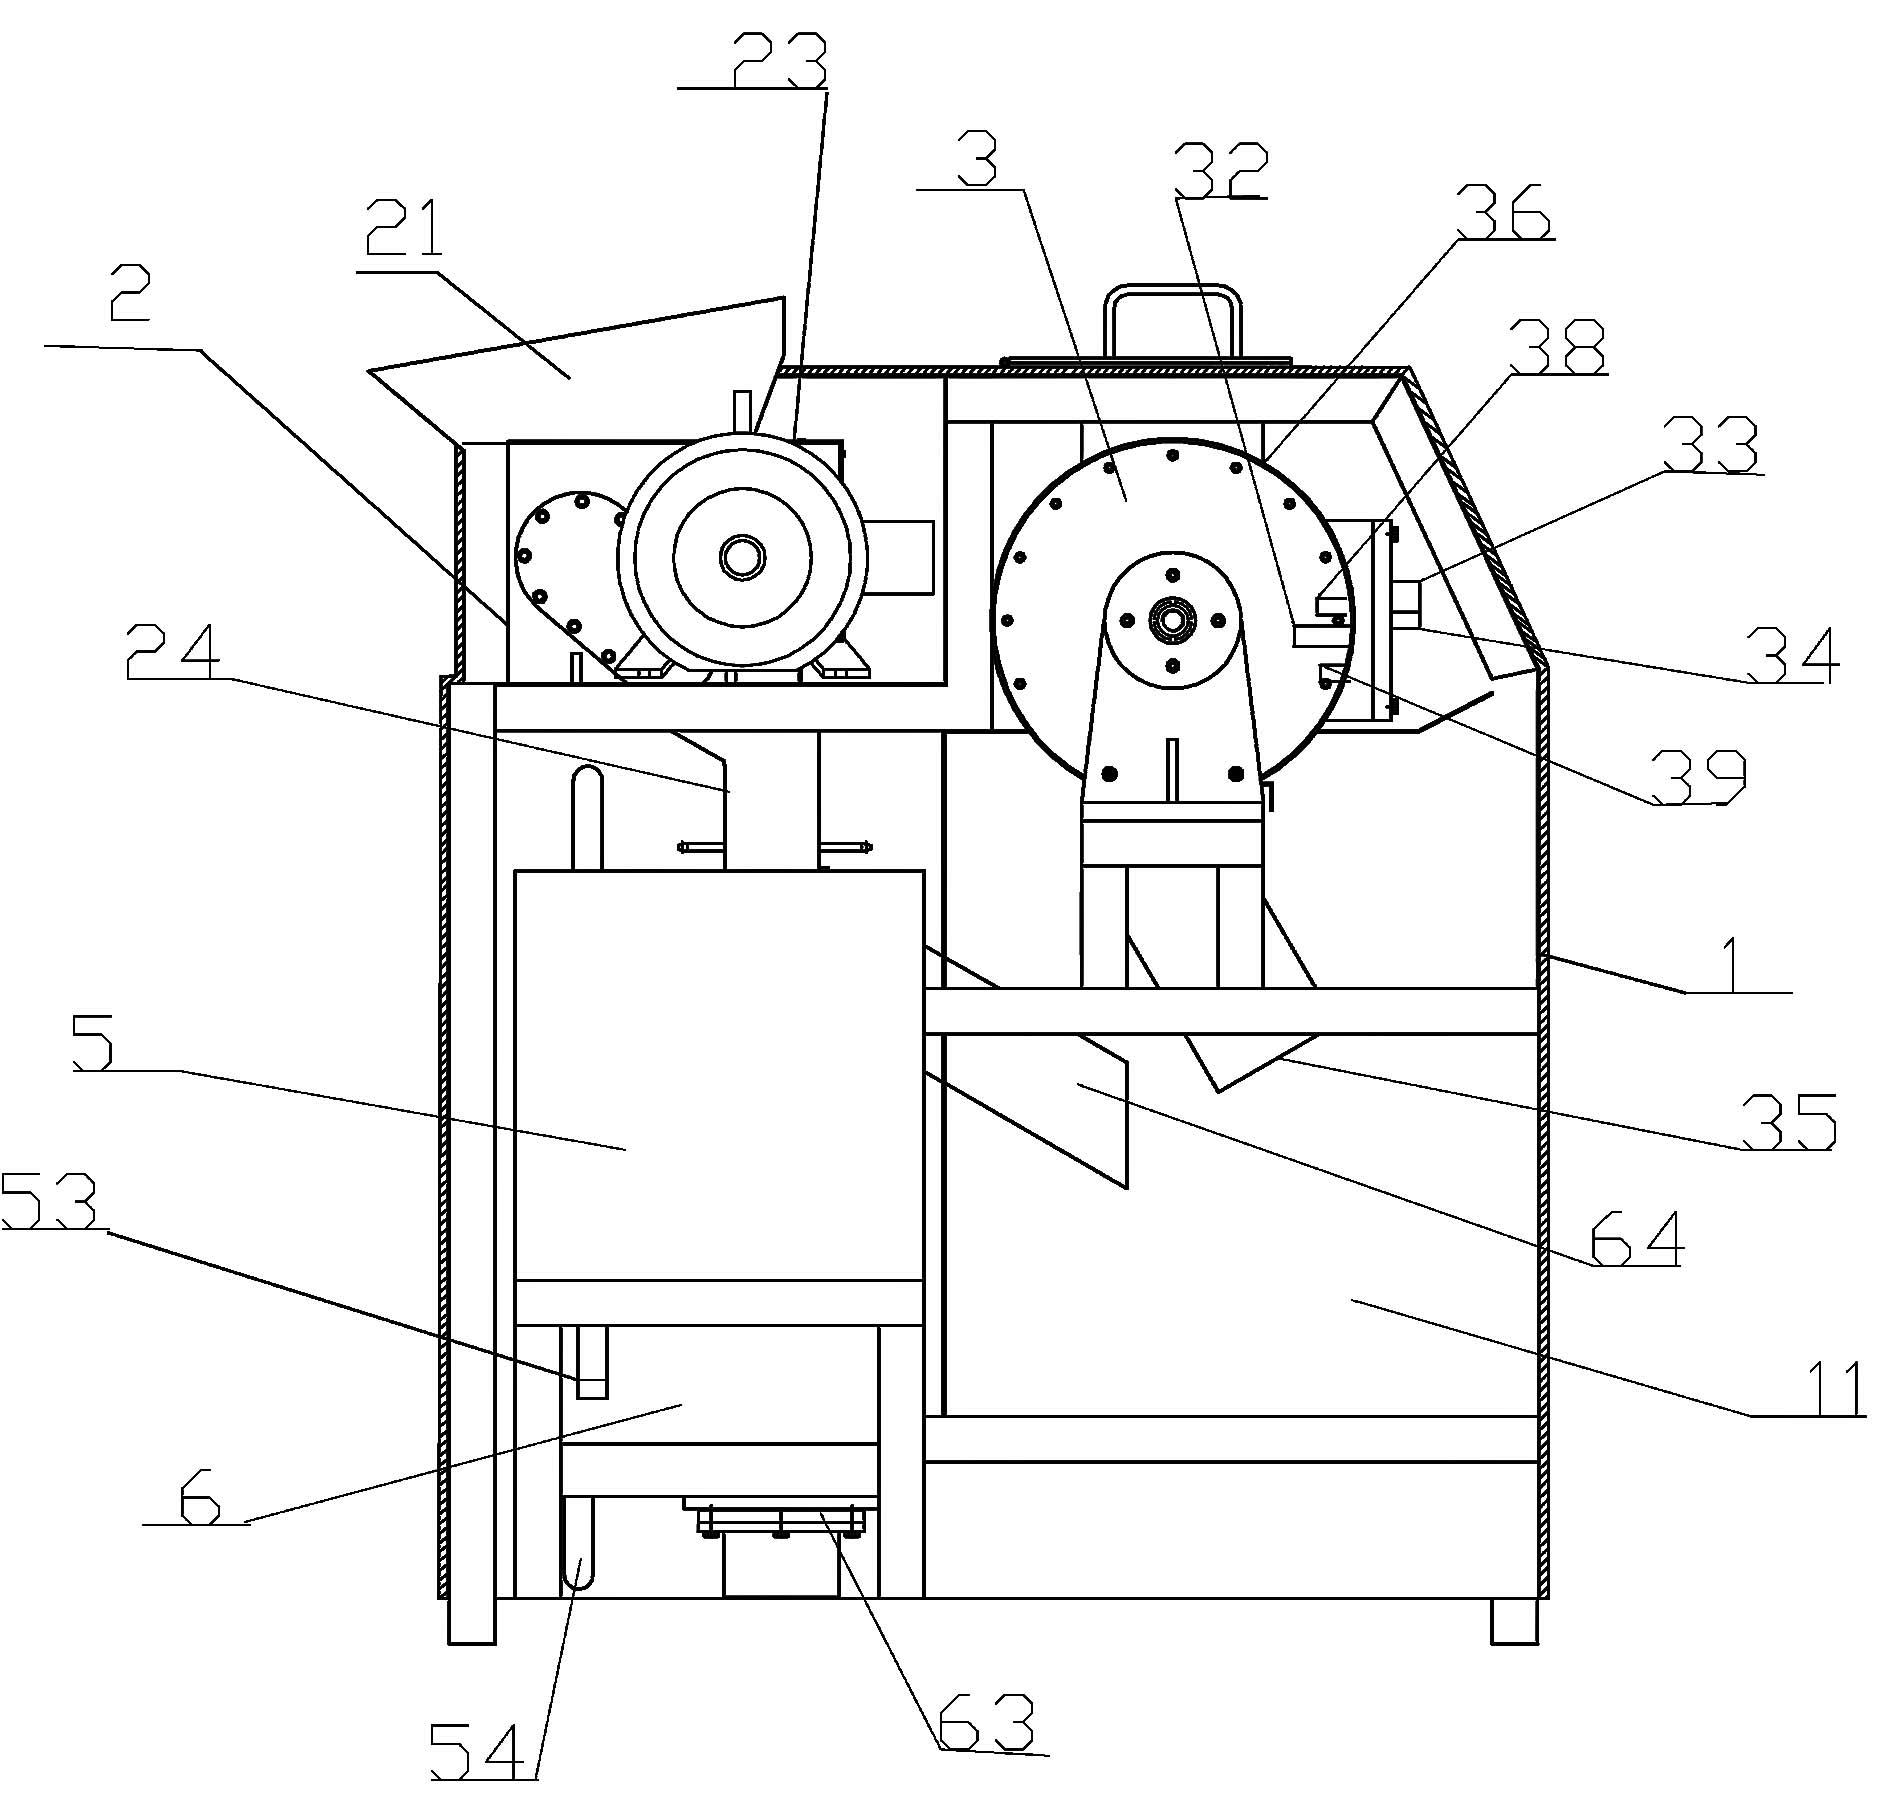 Household waste treatment device